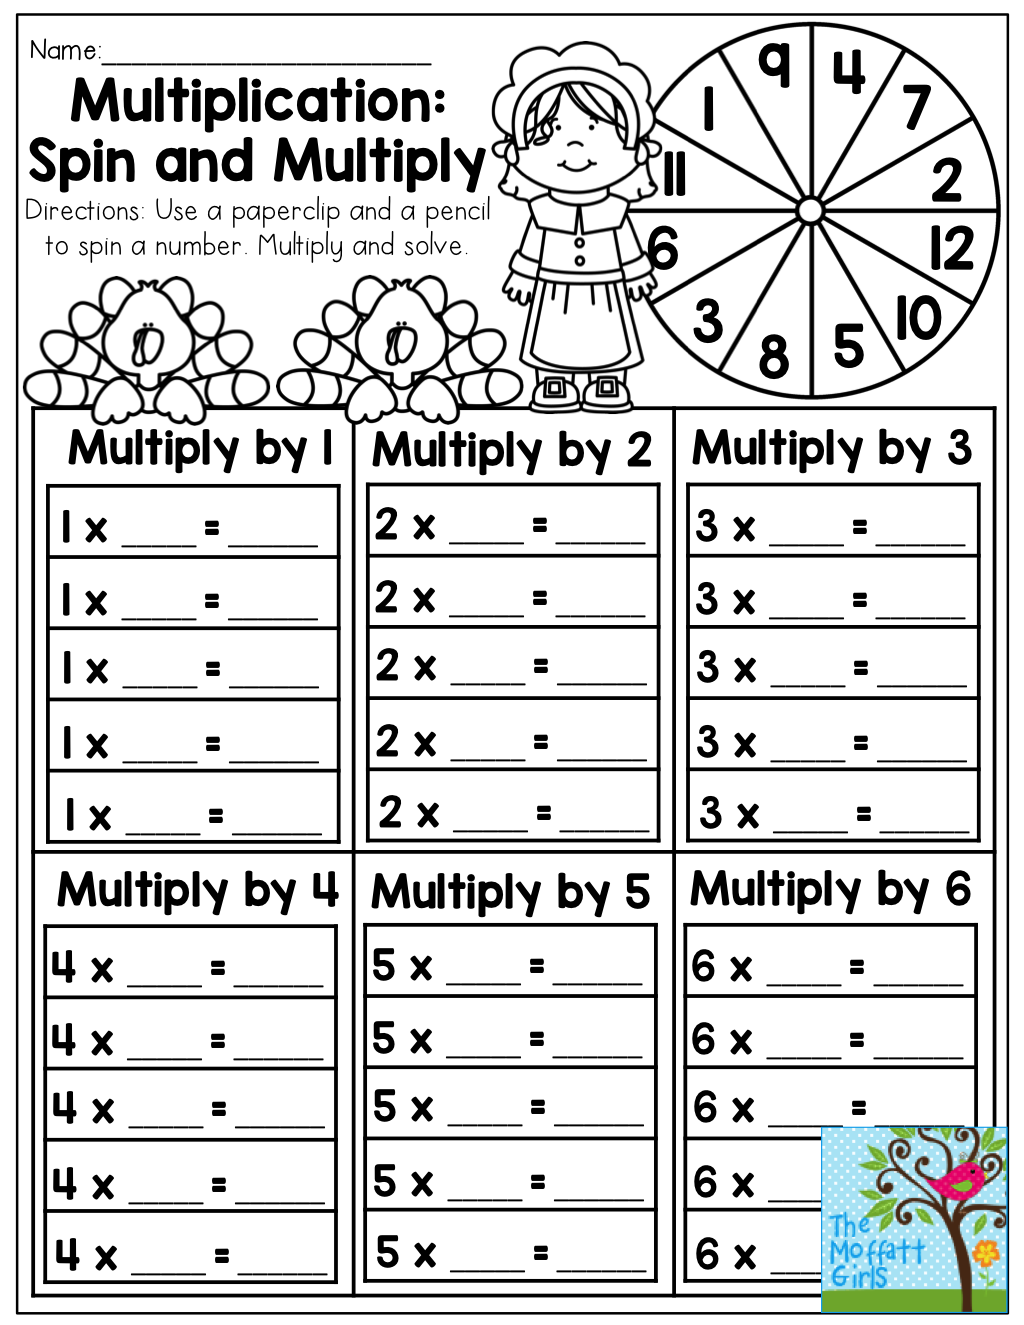 Multiplication Spin and Multiply Such a fun multiplication math game